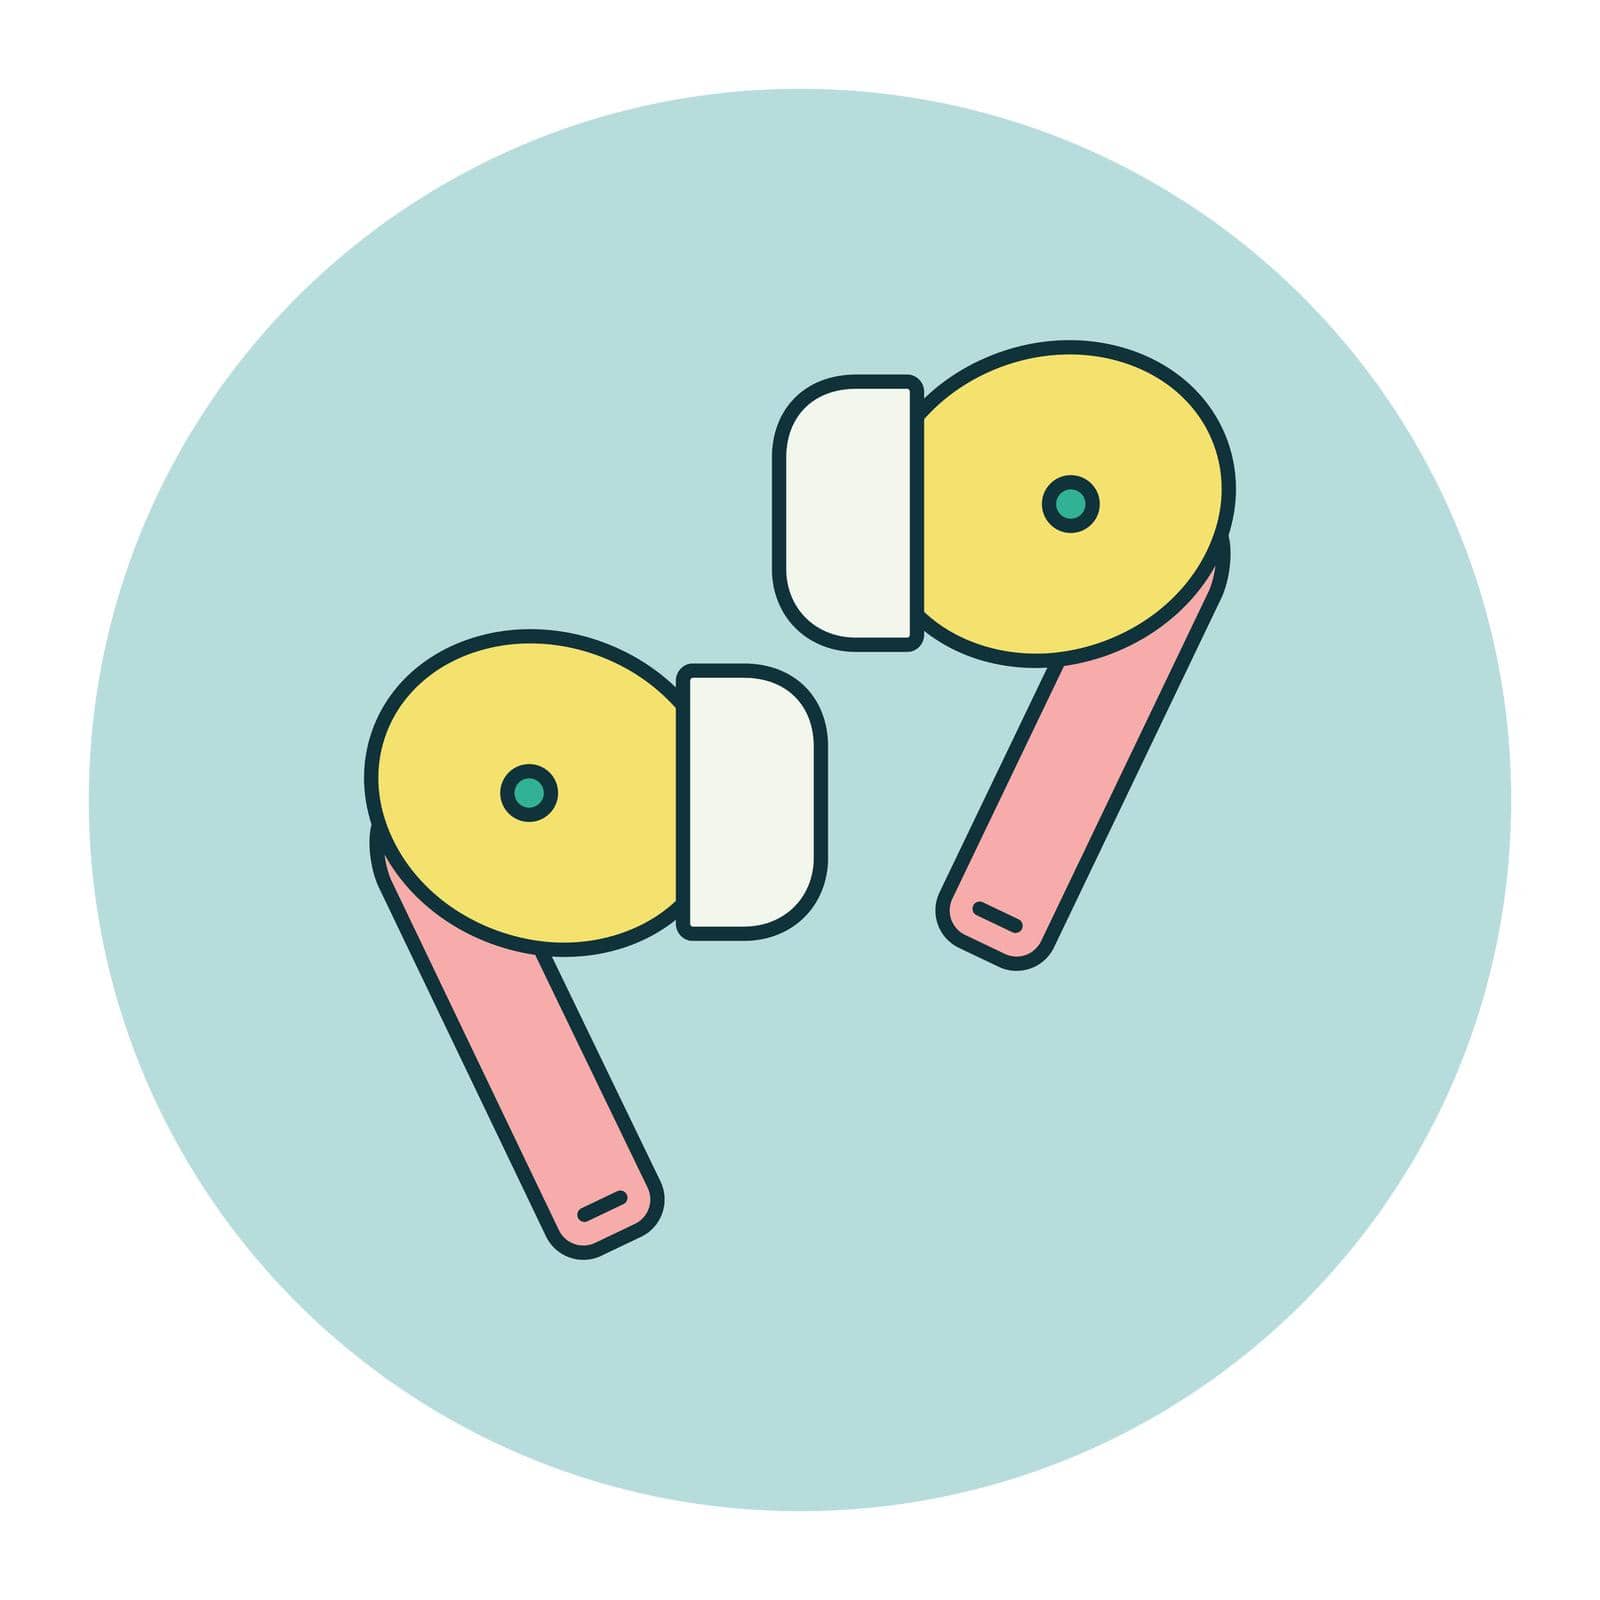 Pair of wireless earbud headphones color vector flat icon. Graph symbol for music and sound web site and apps design, logo, app, UI